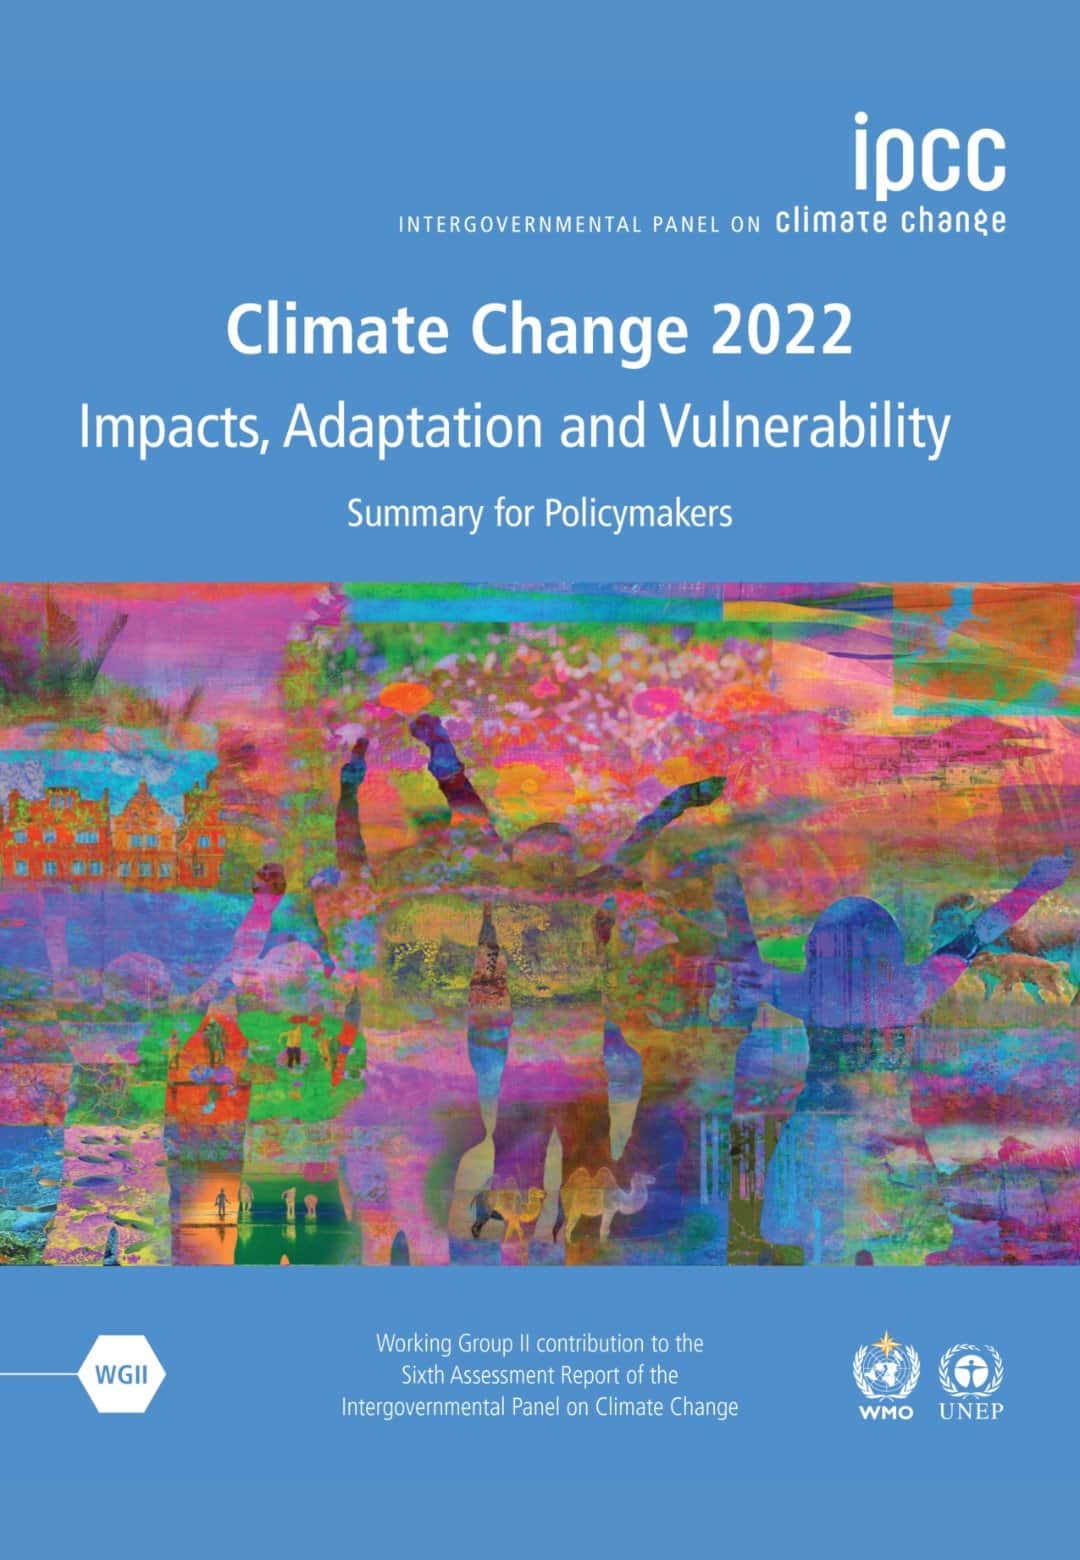 thefuture, IPCC_AR6_WGII_Pictures_Summary_for_Policymakers